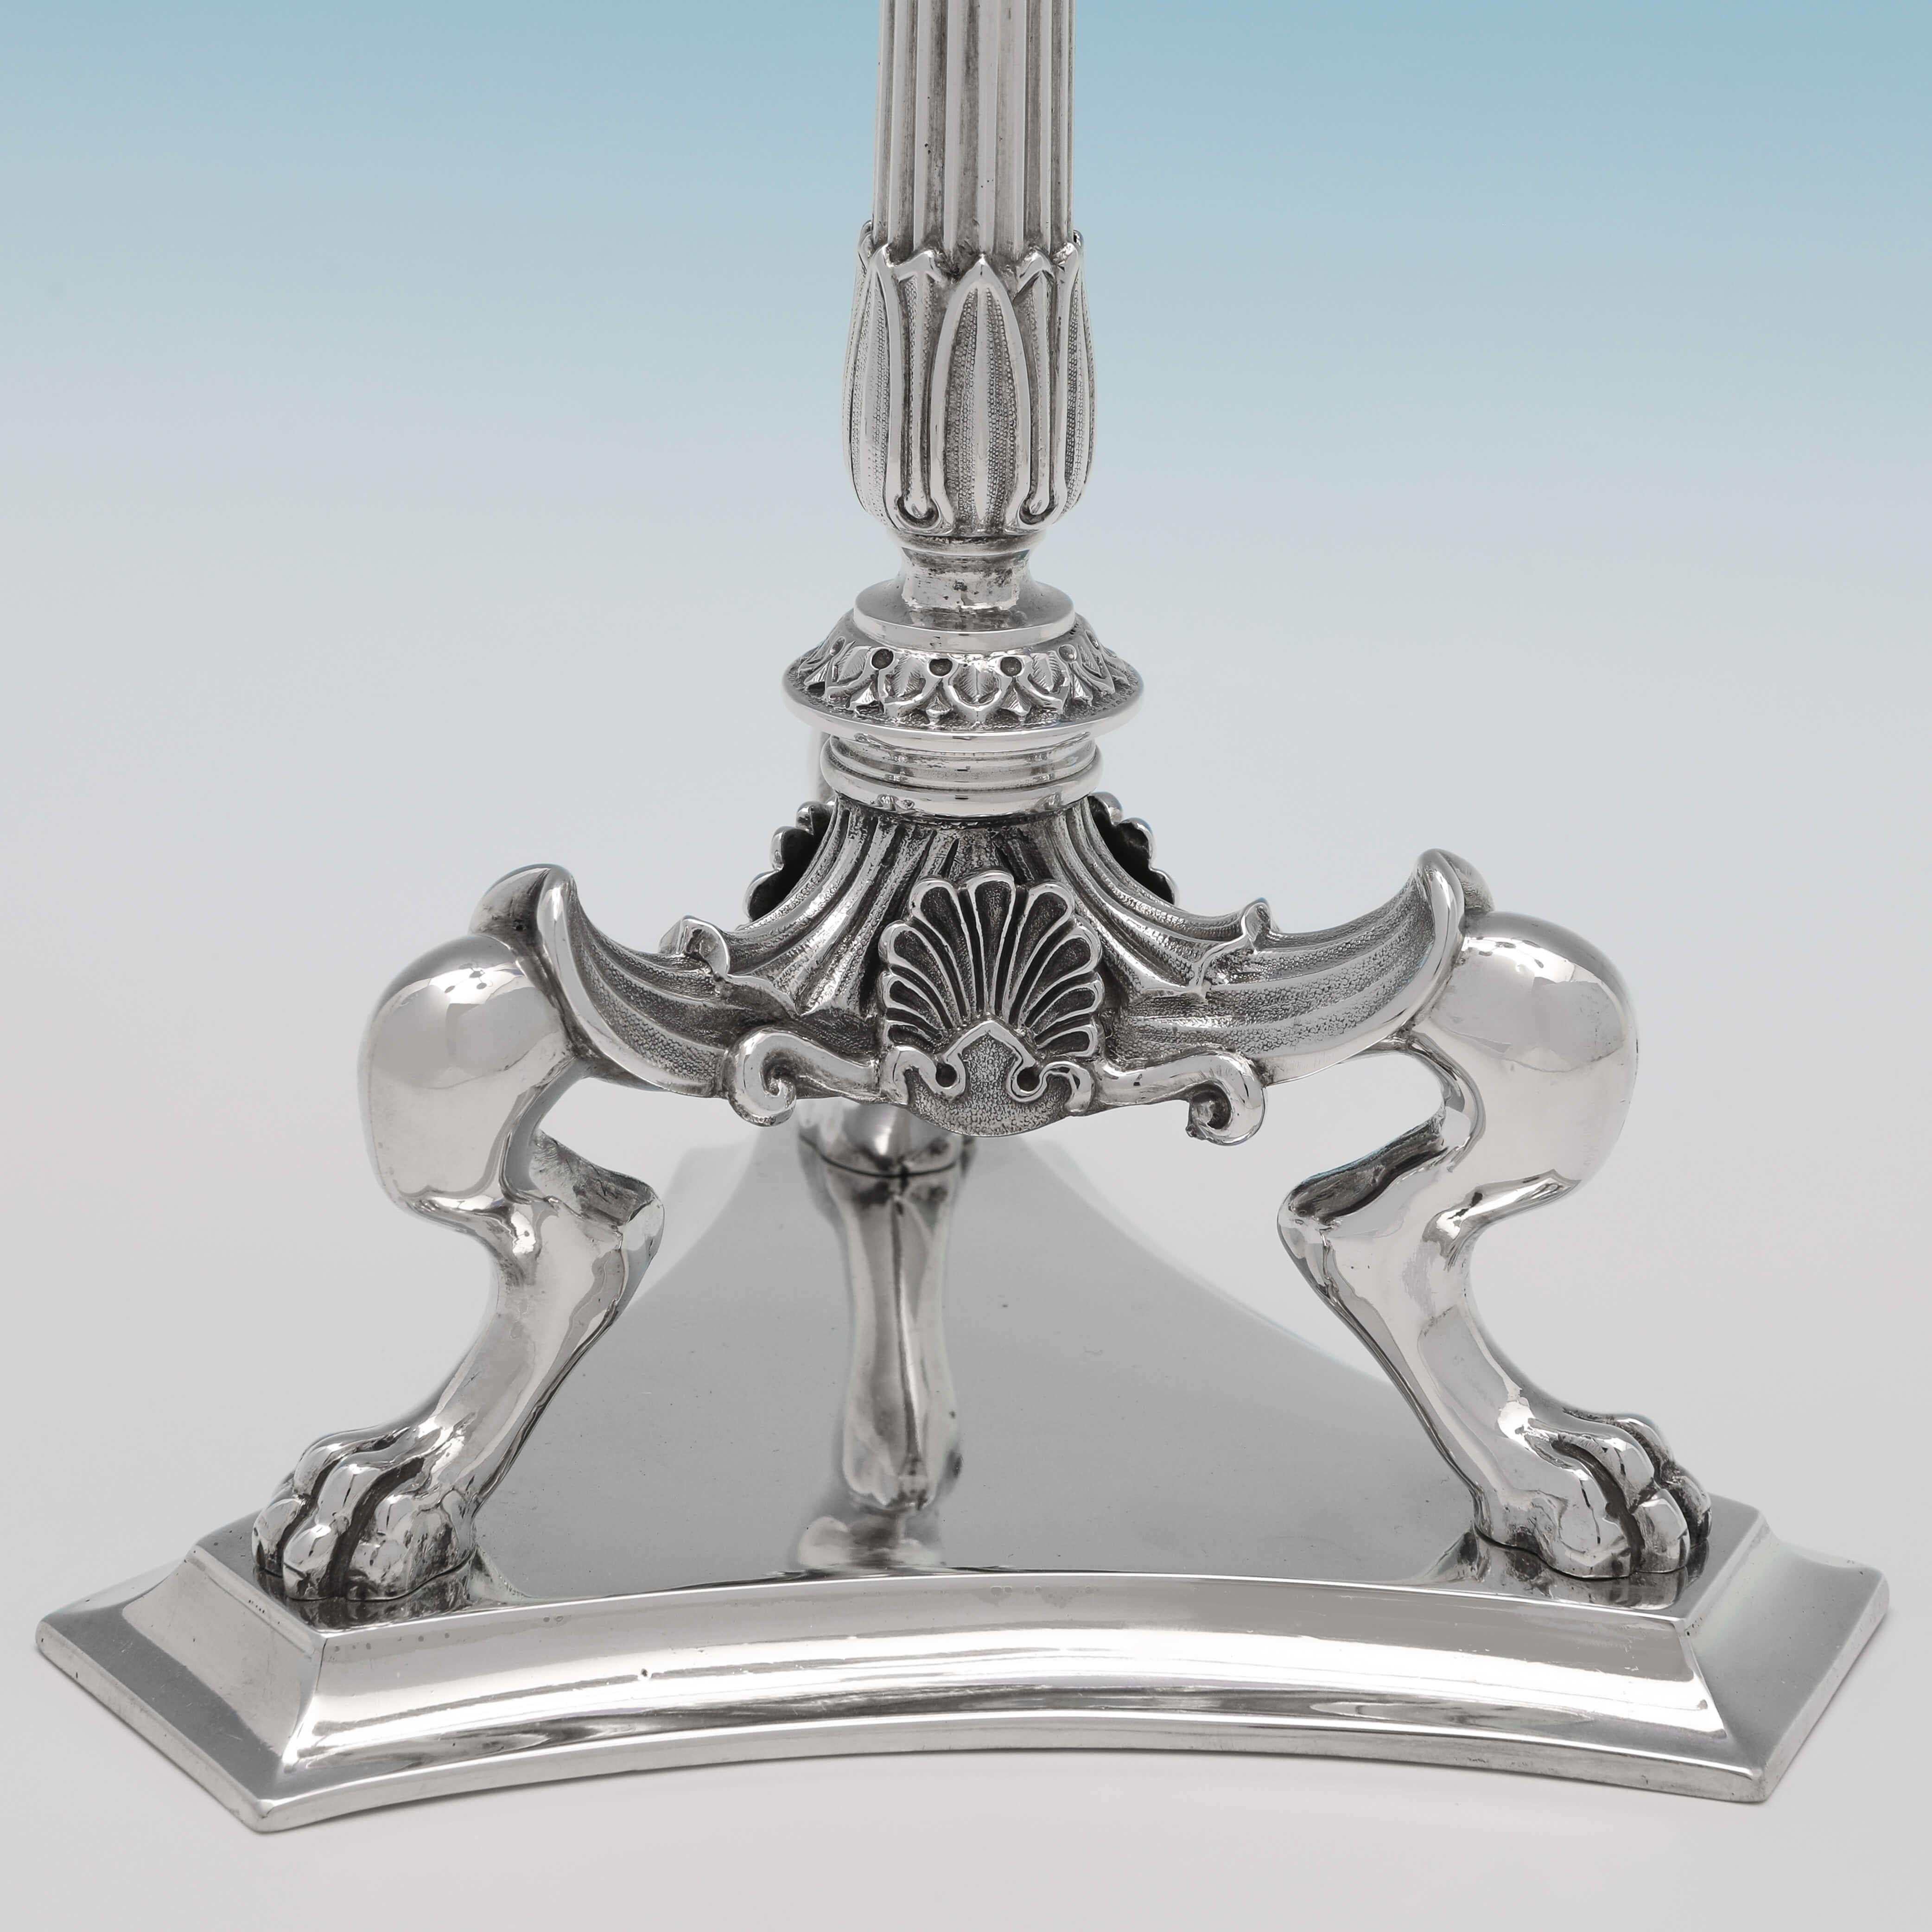 Elkington Neoclassical Candelabra & Centrepiece, Sterling Silver, from 1867 In Good Condition For Sale In London, London